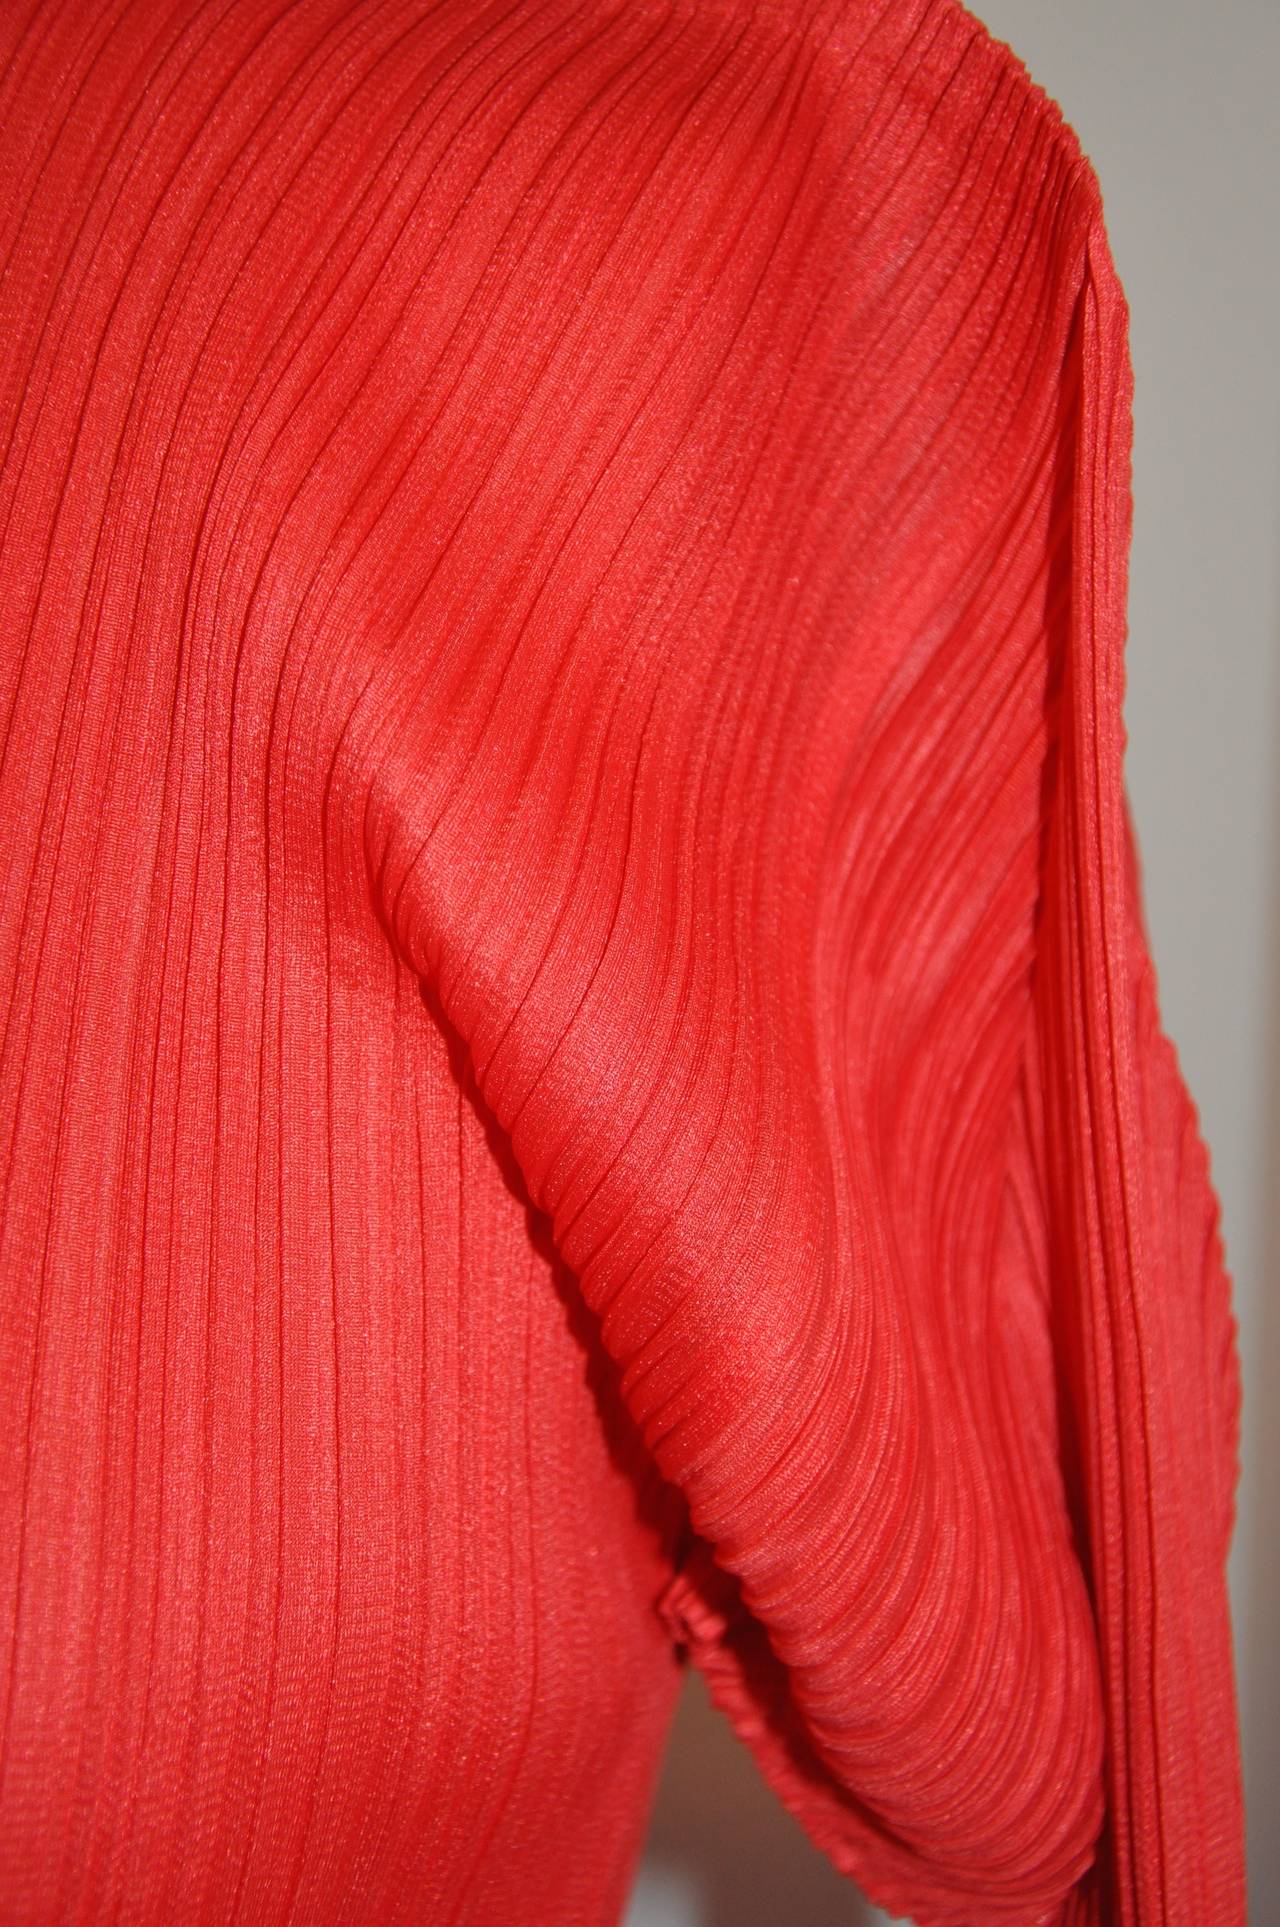 Issey Miyake bold red signature pleated crew-neck top measures 25 5/8